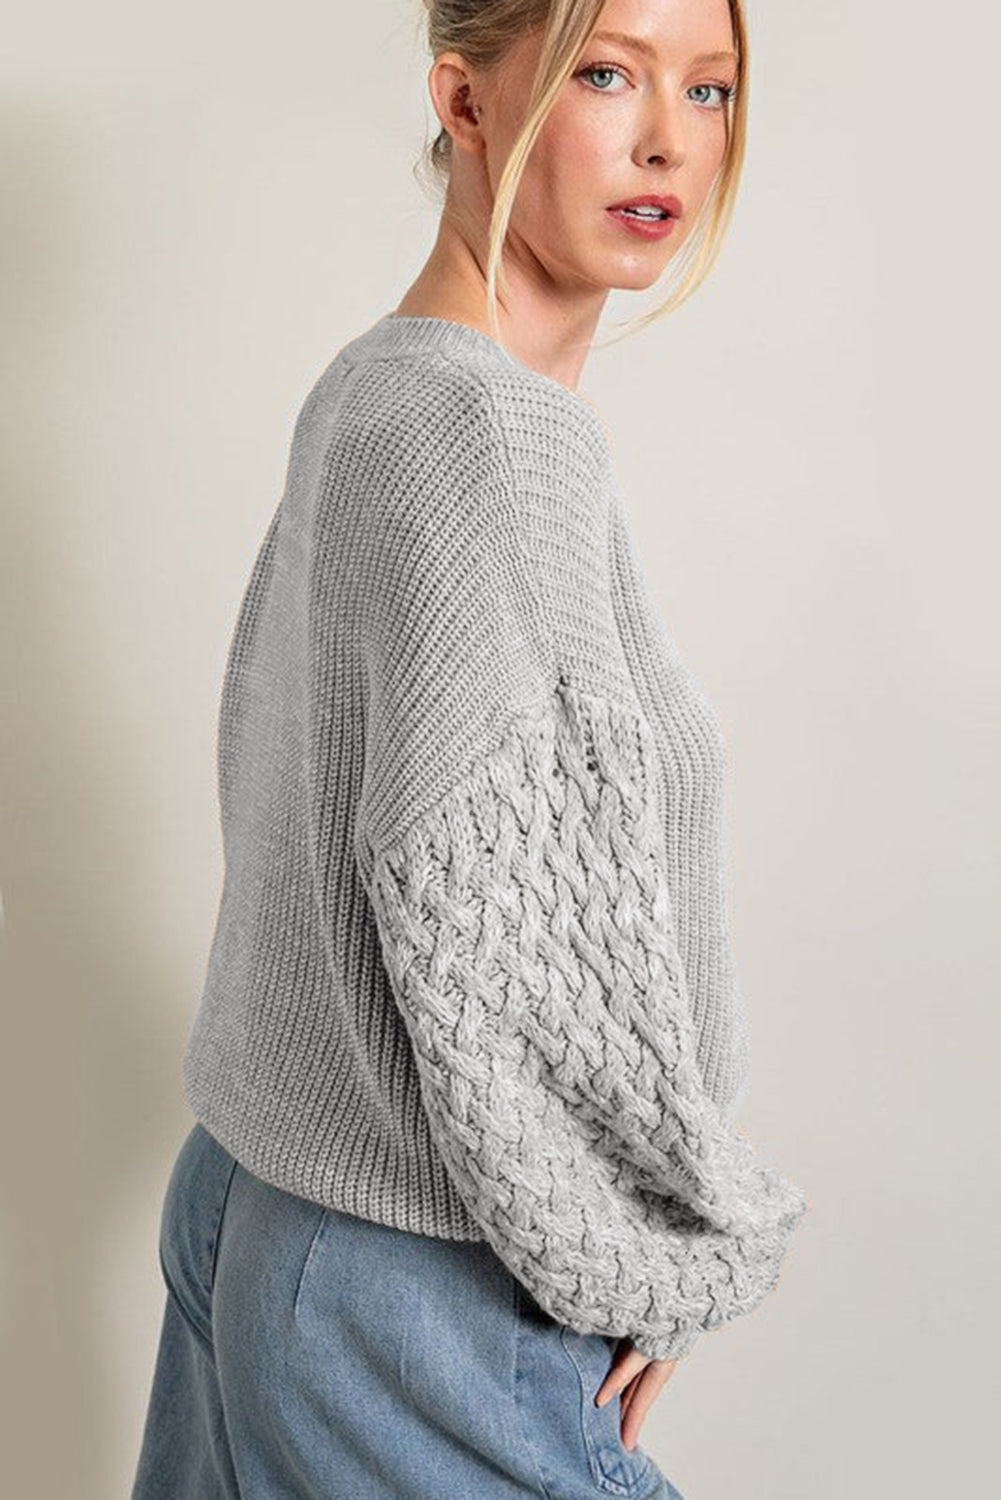 The802Gypsy  sweaters TRAVELING GYPSY-Cable Knit Sweater